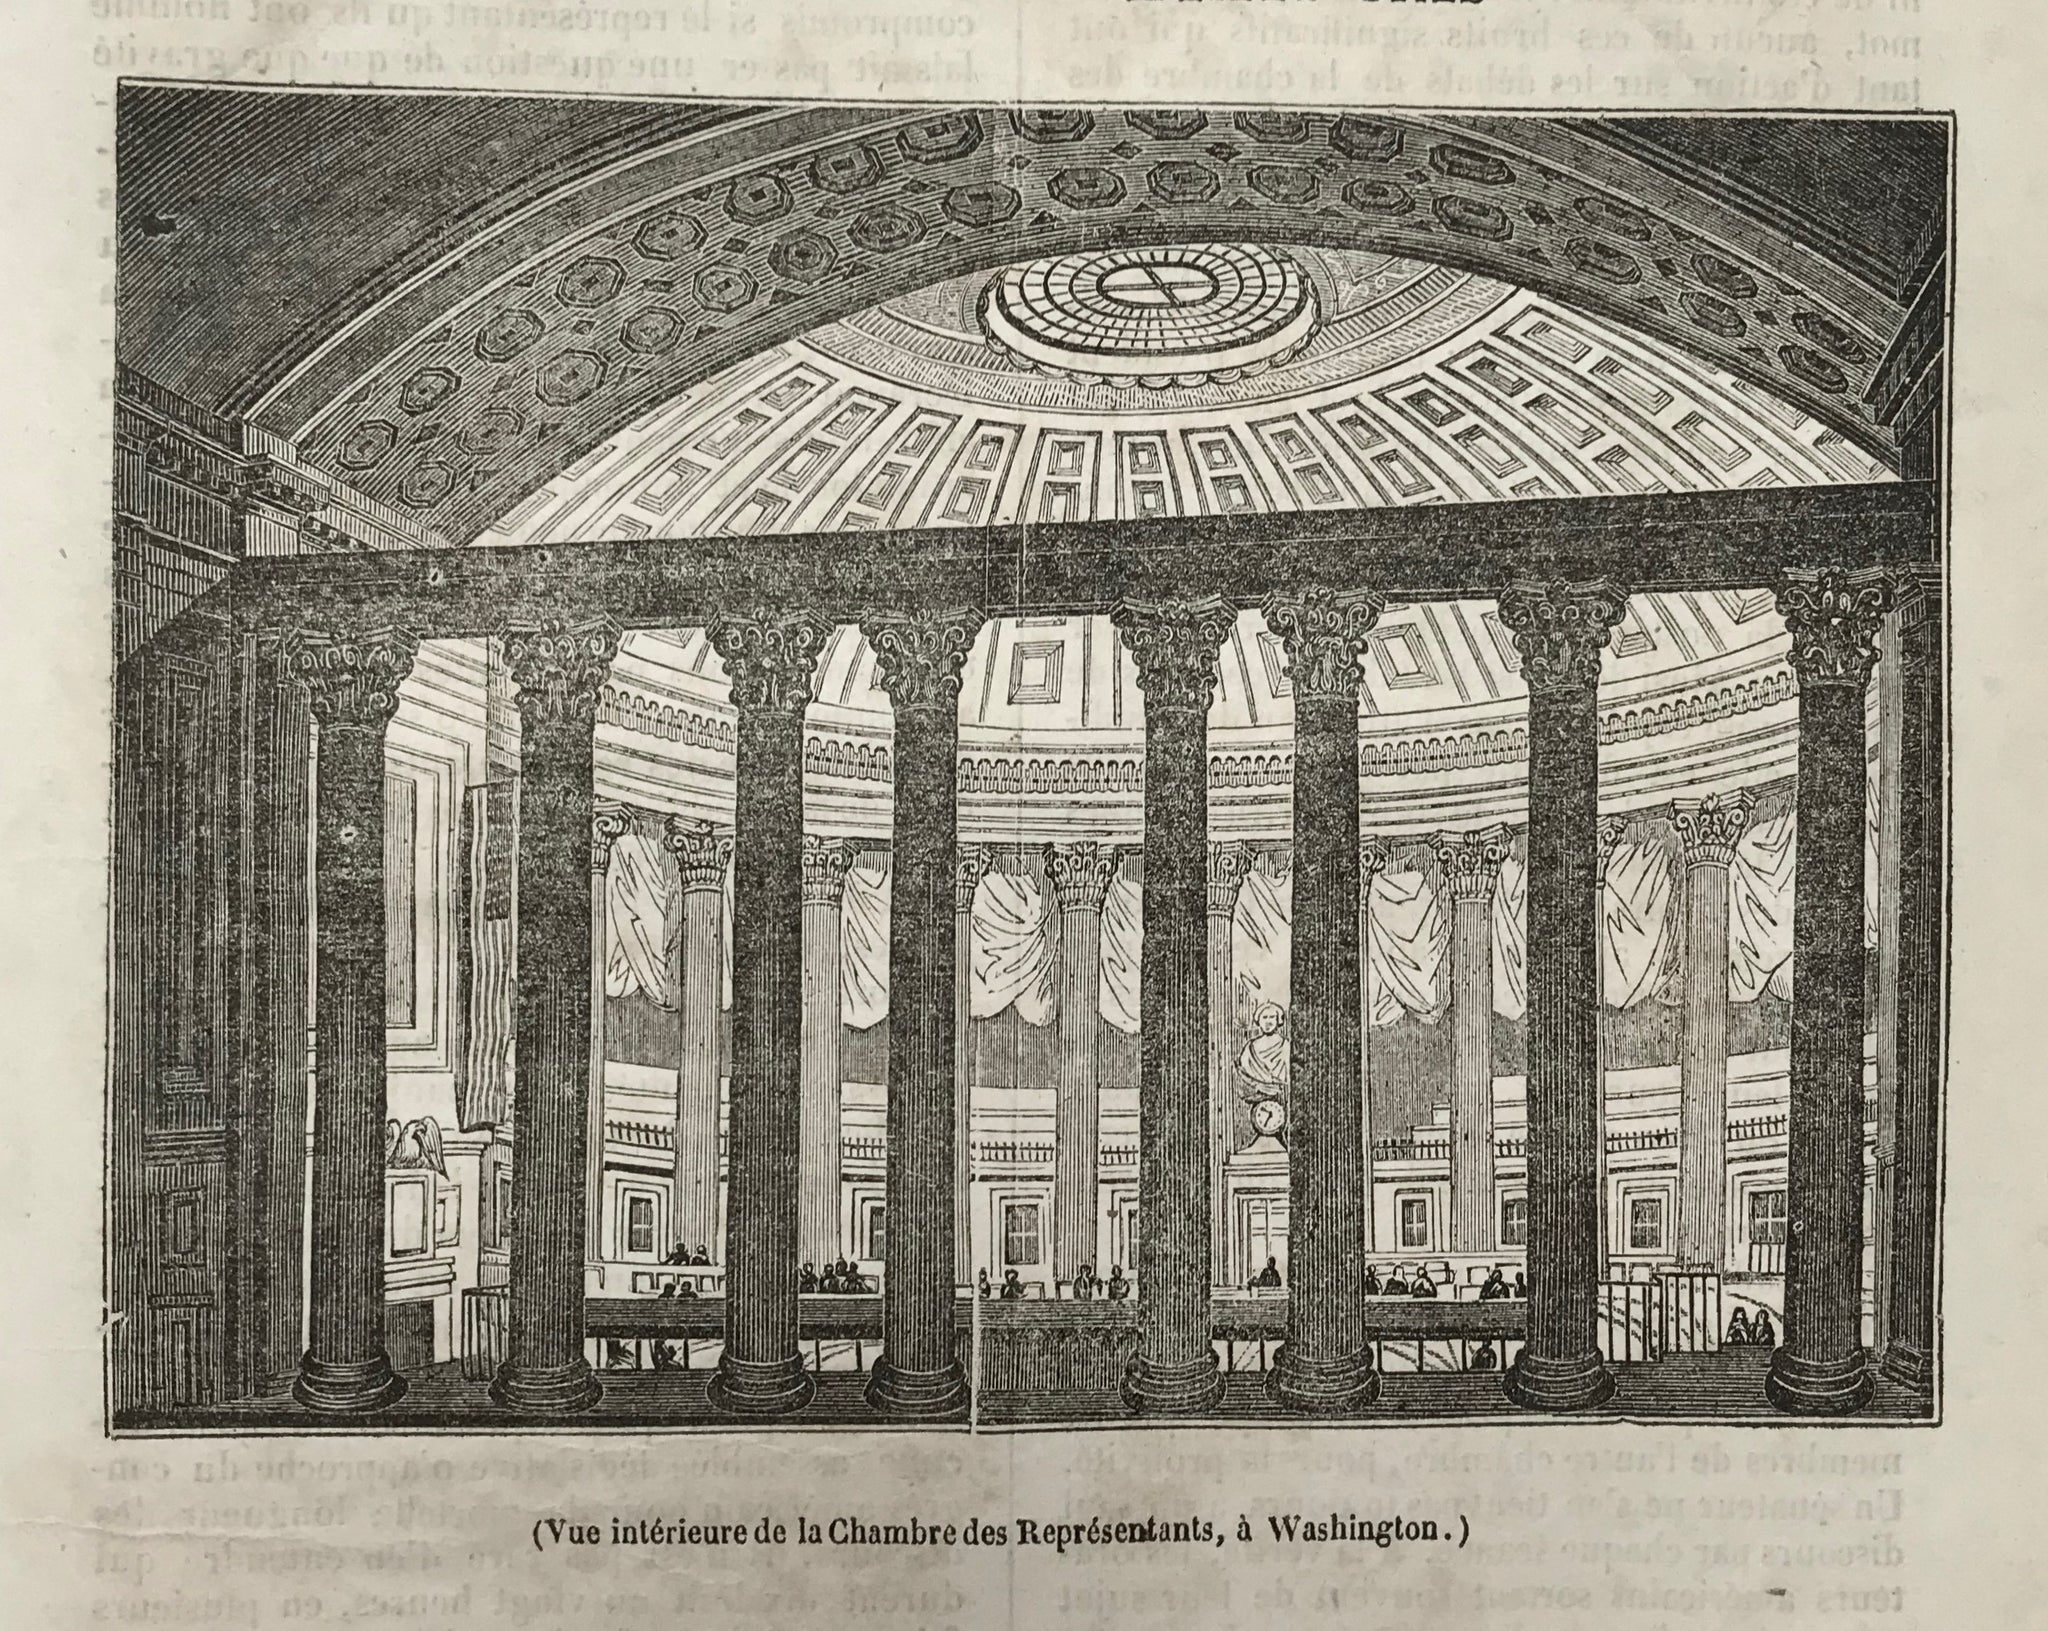 (Vue Interieure de la Chambre des Represents, a Washington.)  Wood engraving published 1844. Below the image and on the reverse side is text in French about the US Congress.